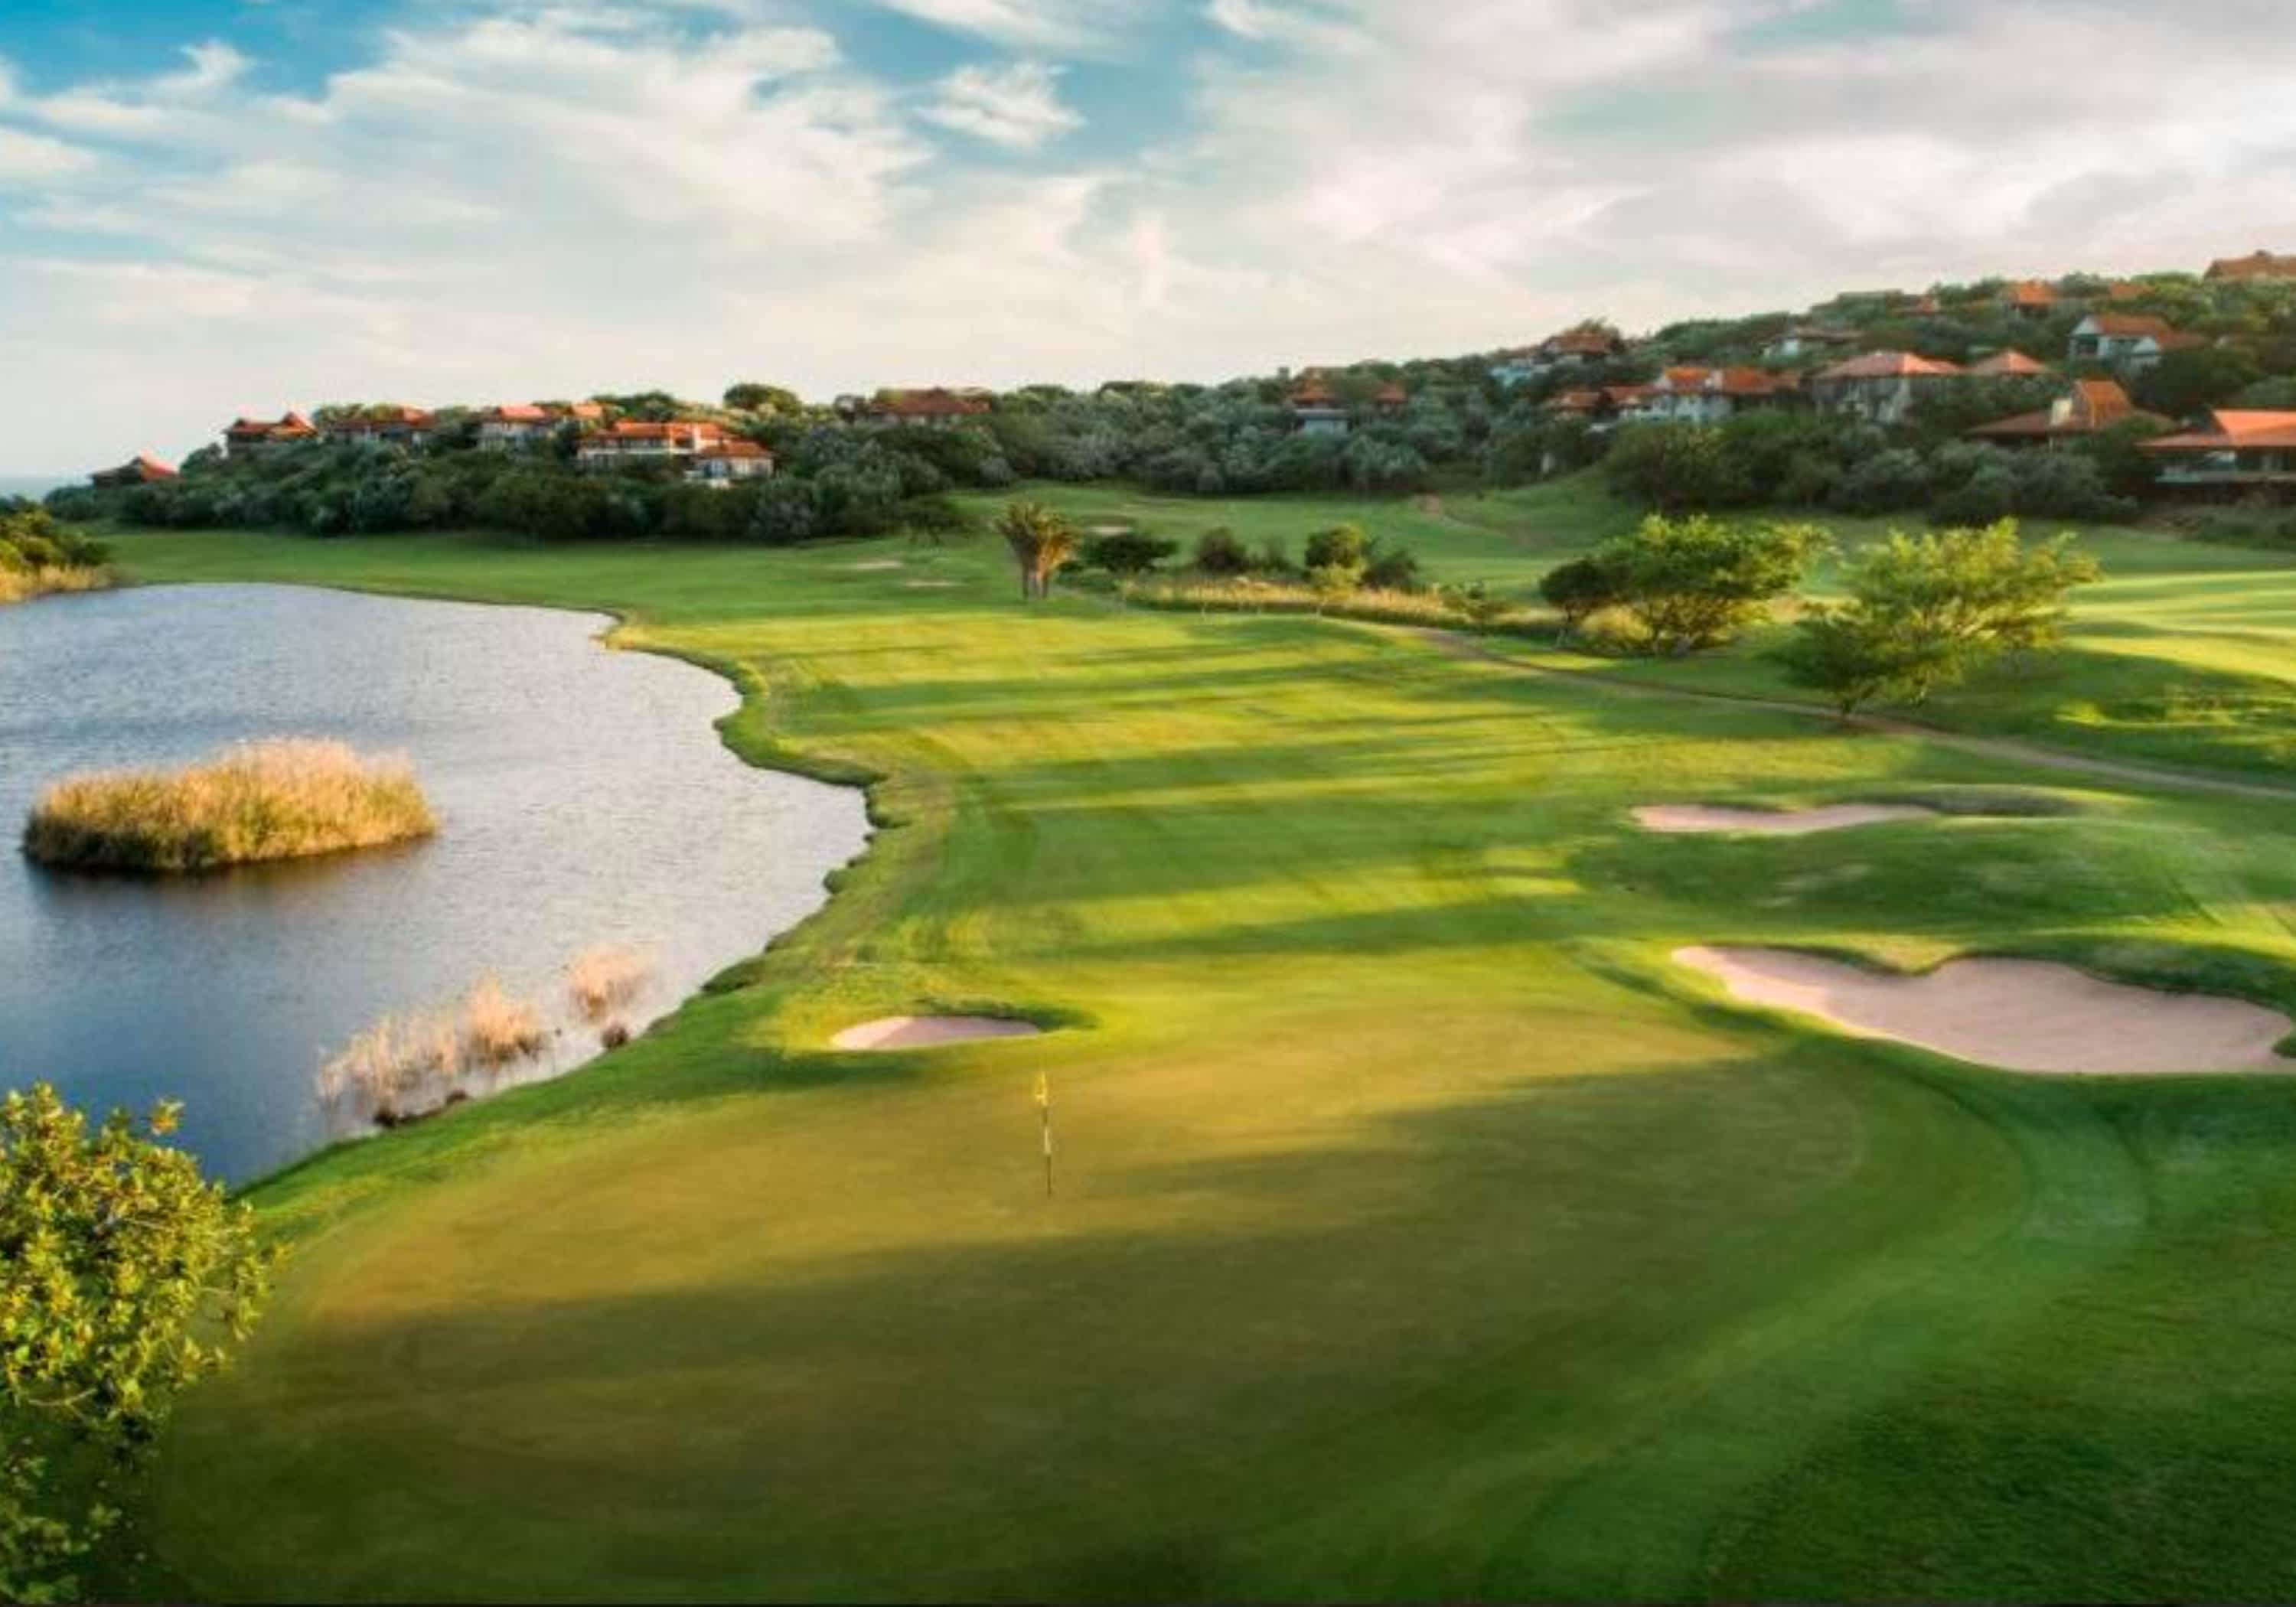 WINTER SPECIAL JUNE-AUG 24!  Zimbali Lodge Golf Package: 1 Night Stay for 2 + Breakfast & Dinner + 1 Round each from R3 225 per person!